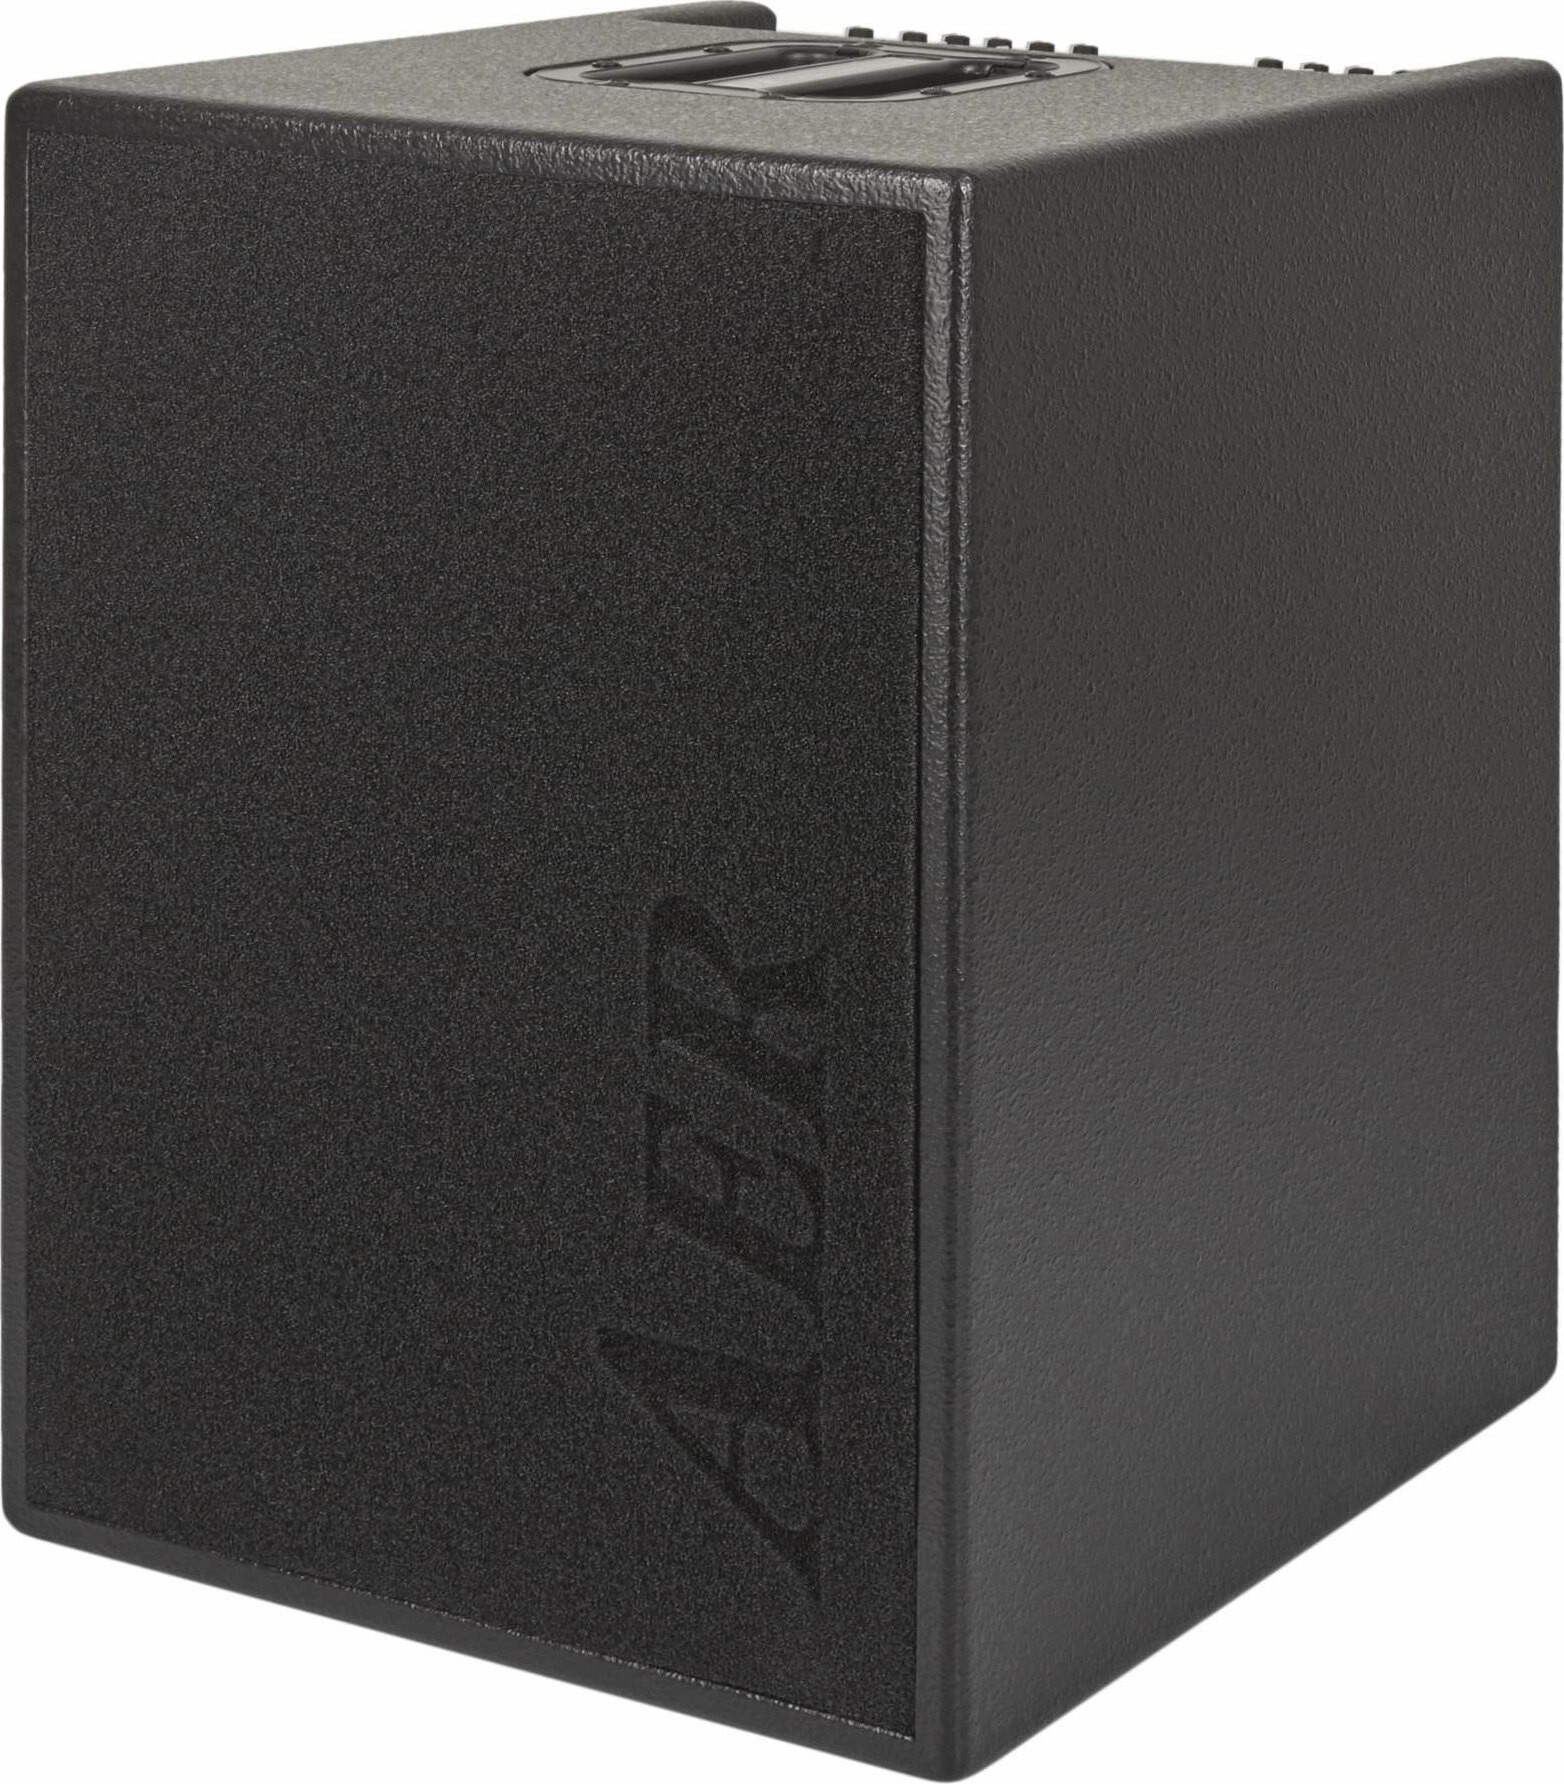 Aer Basic Performer 2 200w 4x8 Black +housse - Combo amplificador para bajo - Main picture